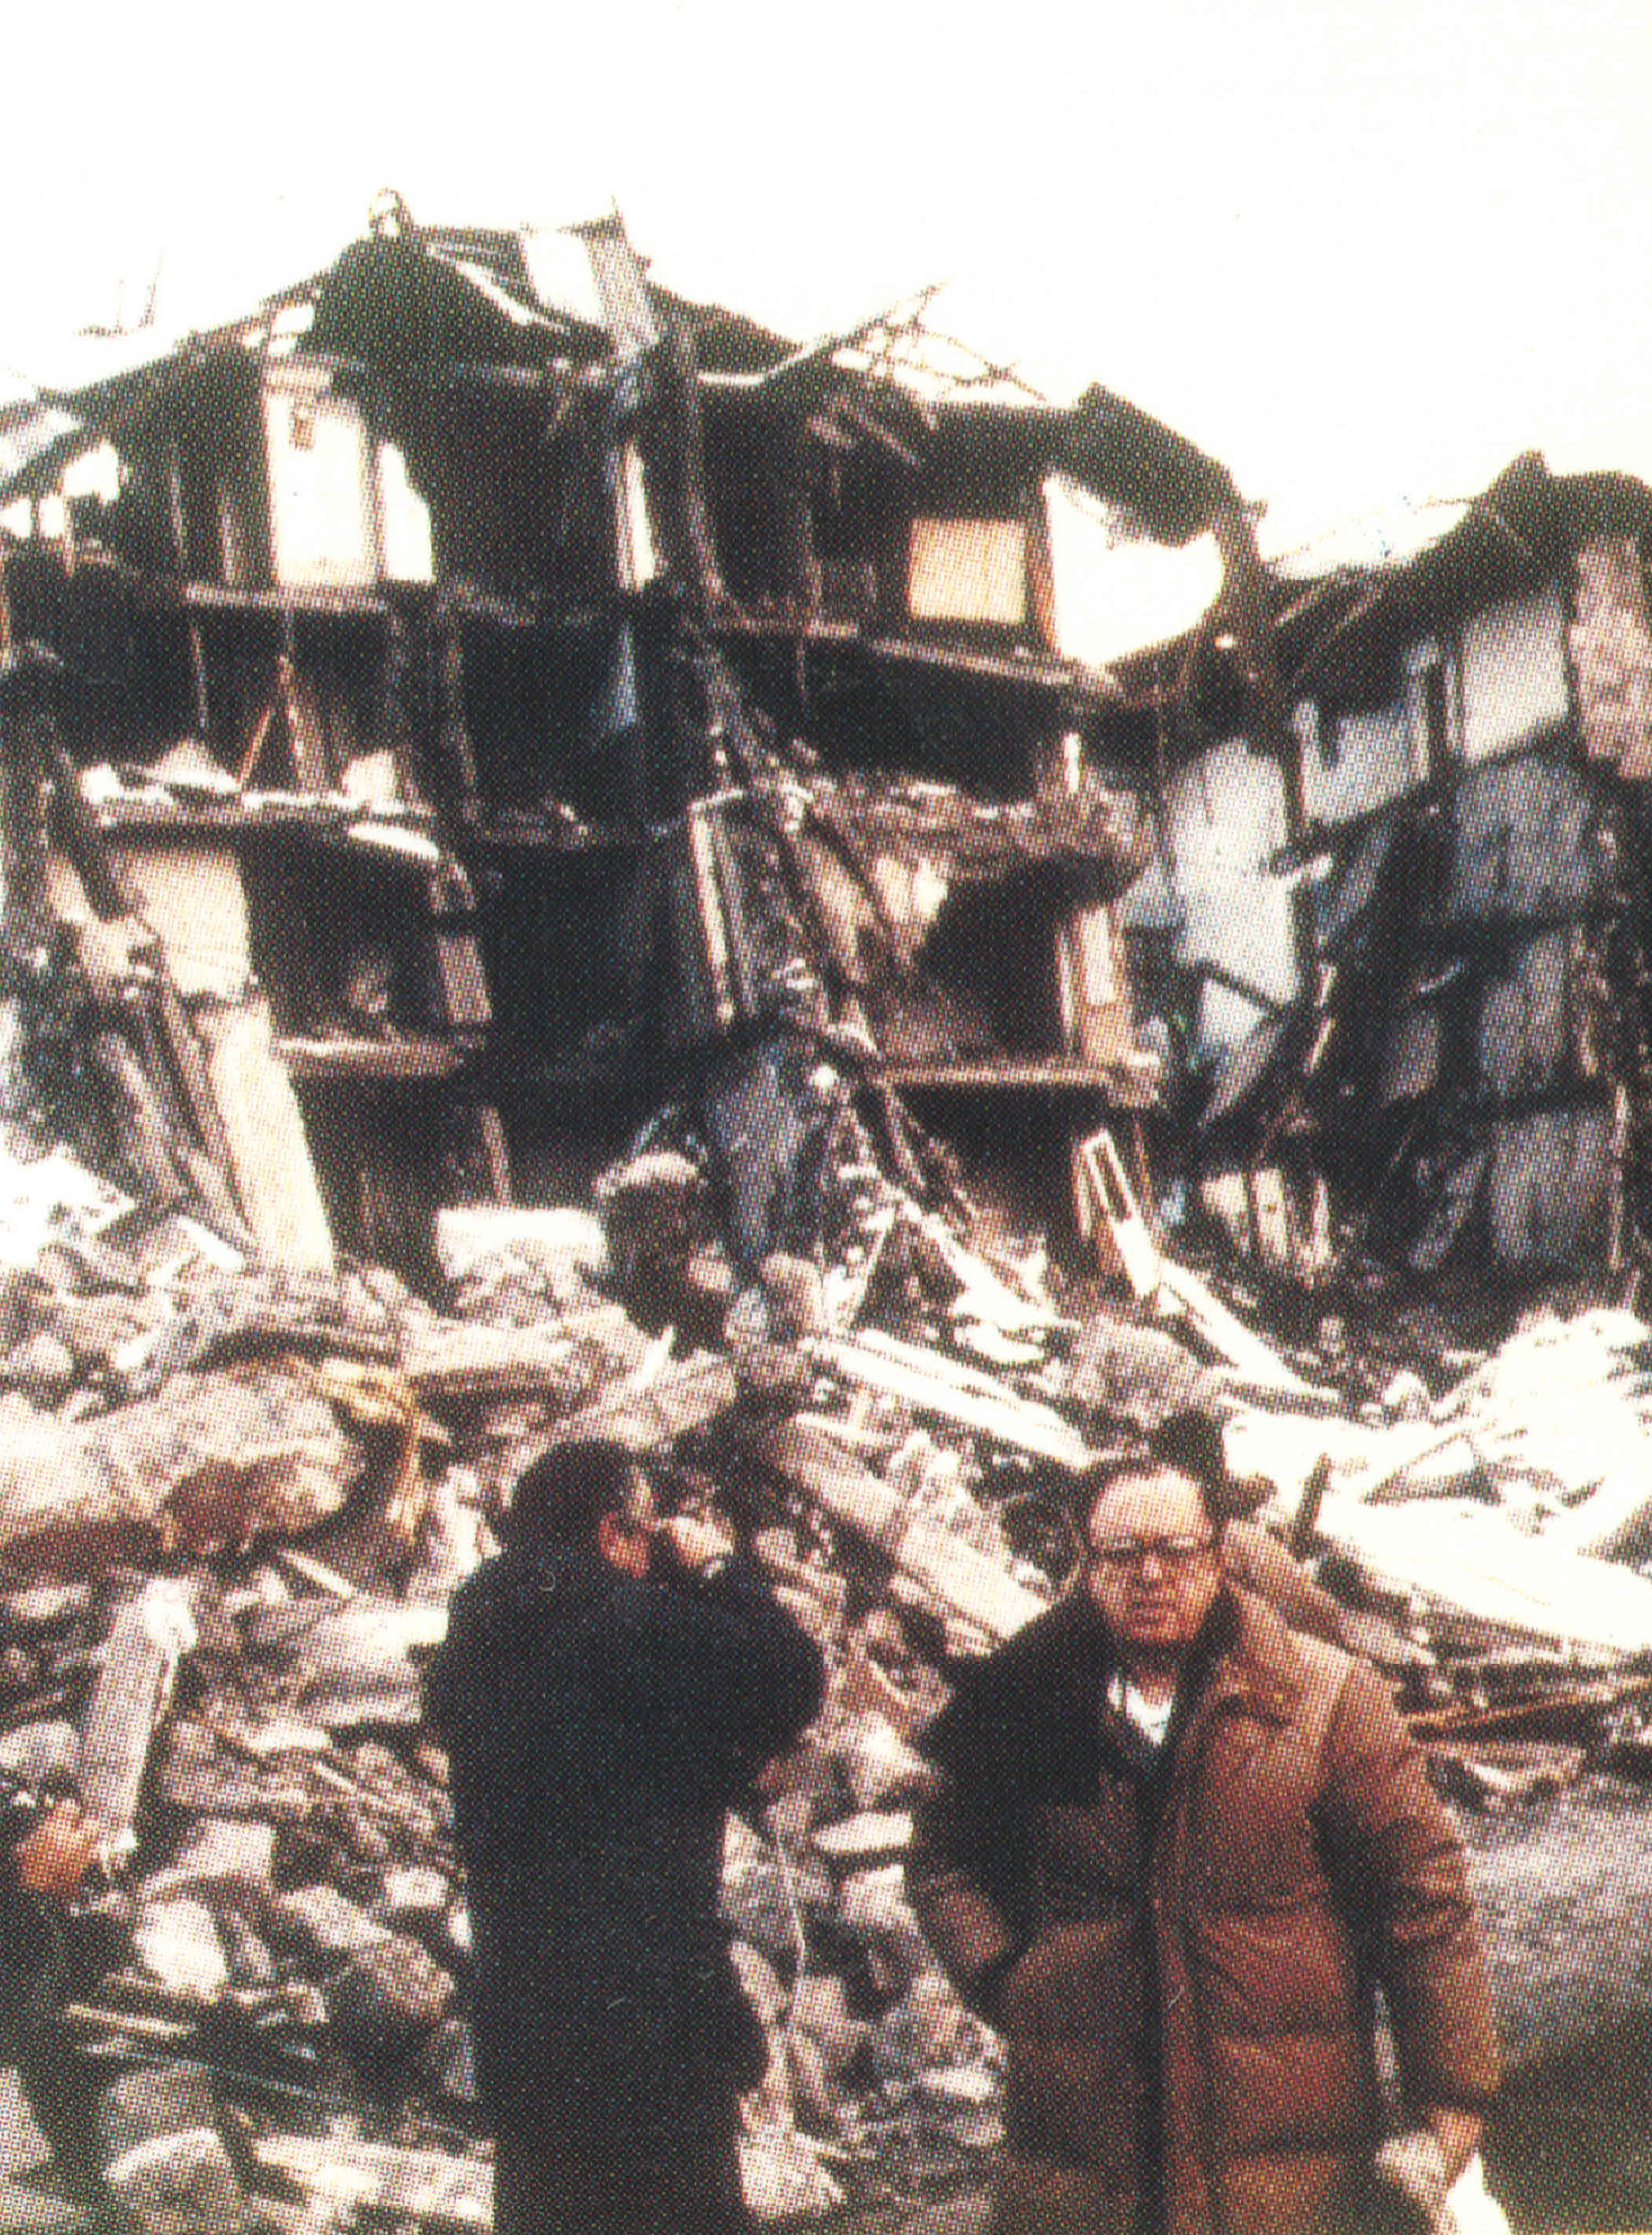 Dr. Mirhan Agbabian surveying the earthquake impact in 1989.